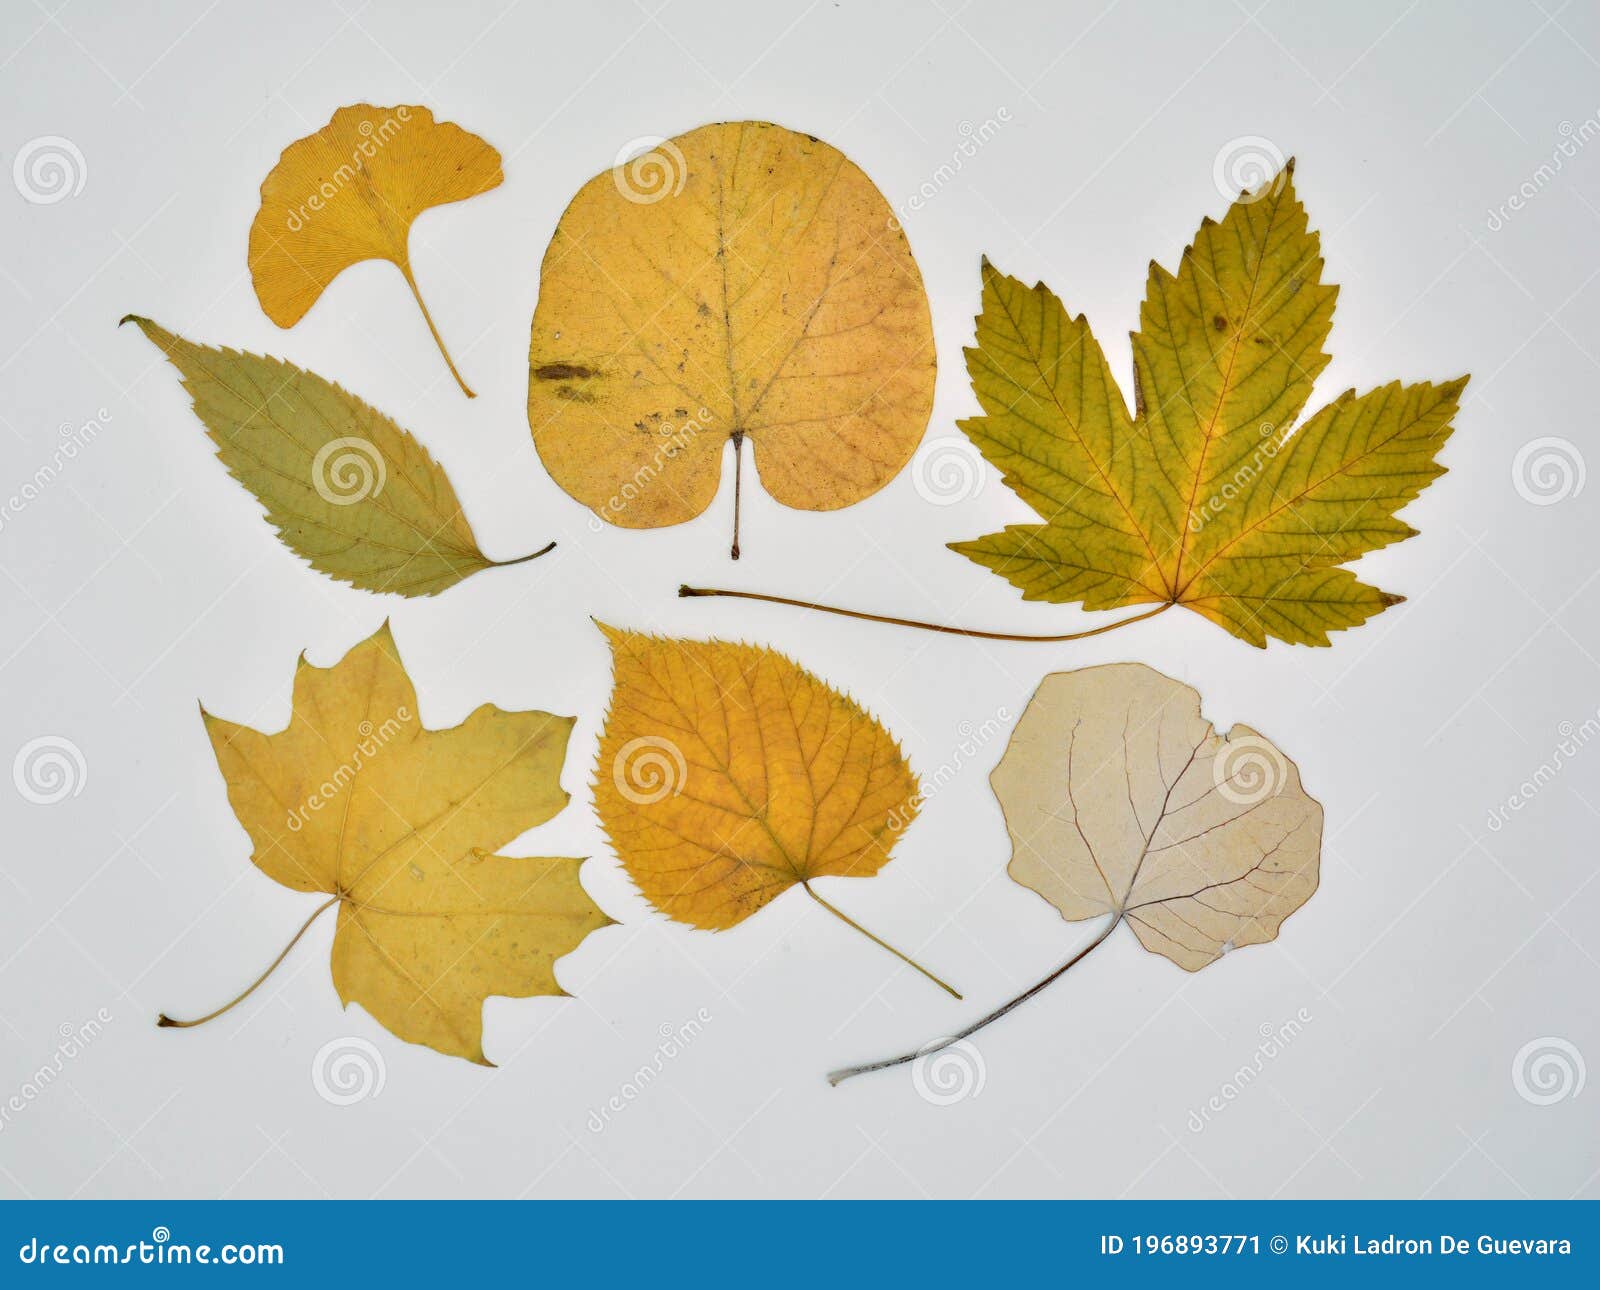 collection of dry leaves in autumn